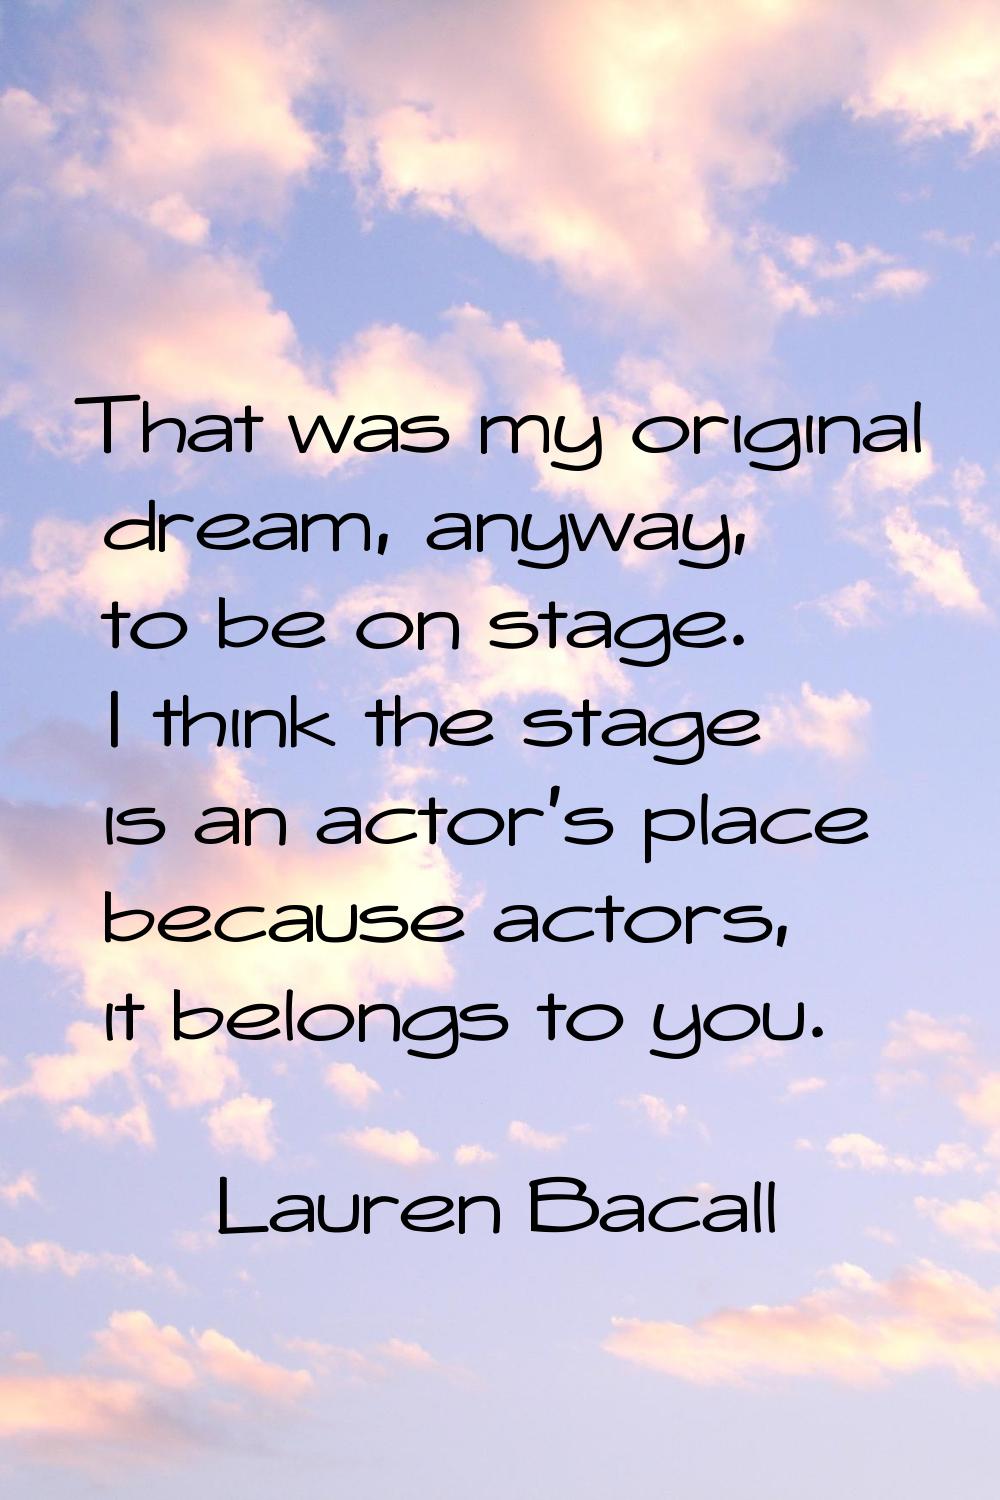 That was my original dream, anyway, to be on stage. I think the stage is an actor's place because a